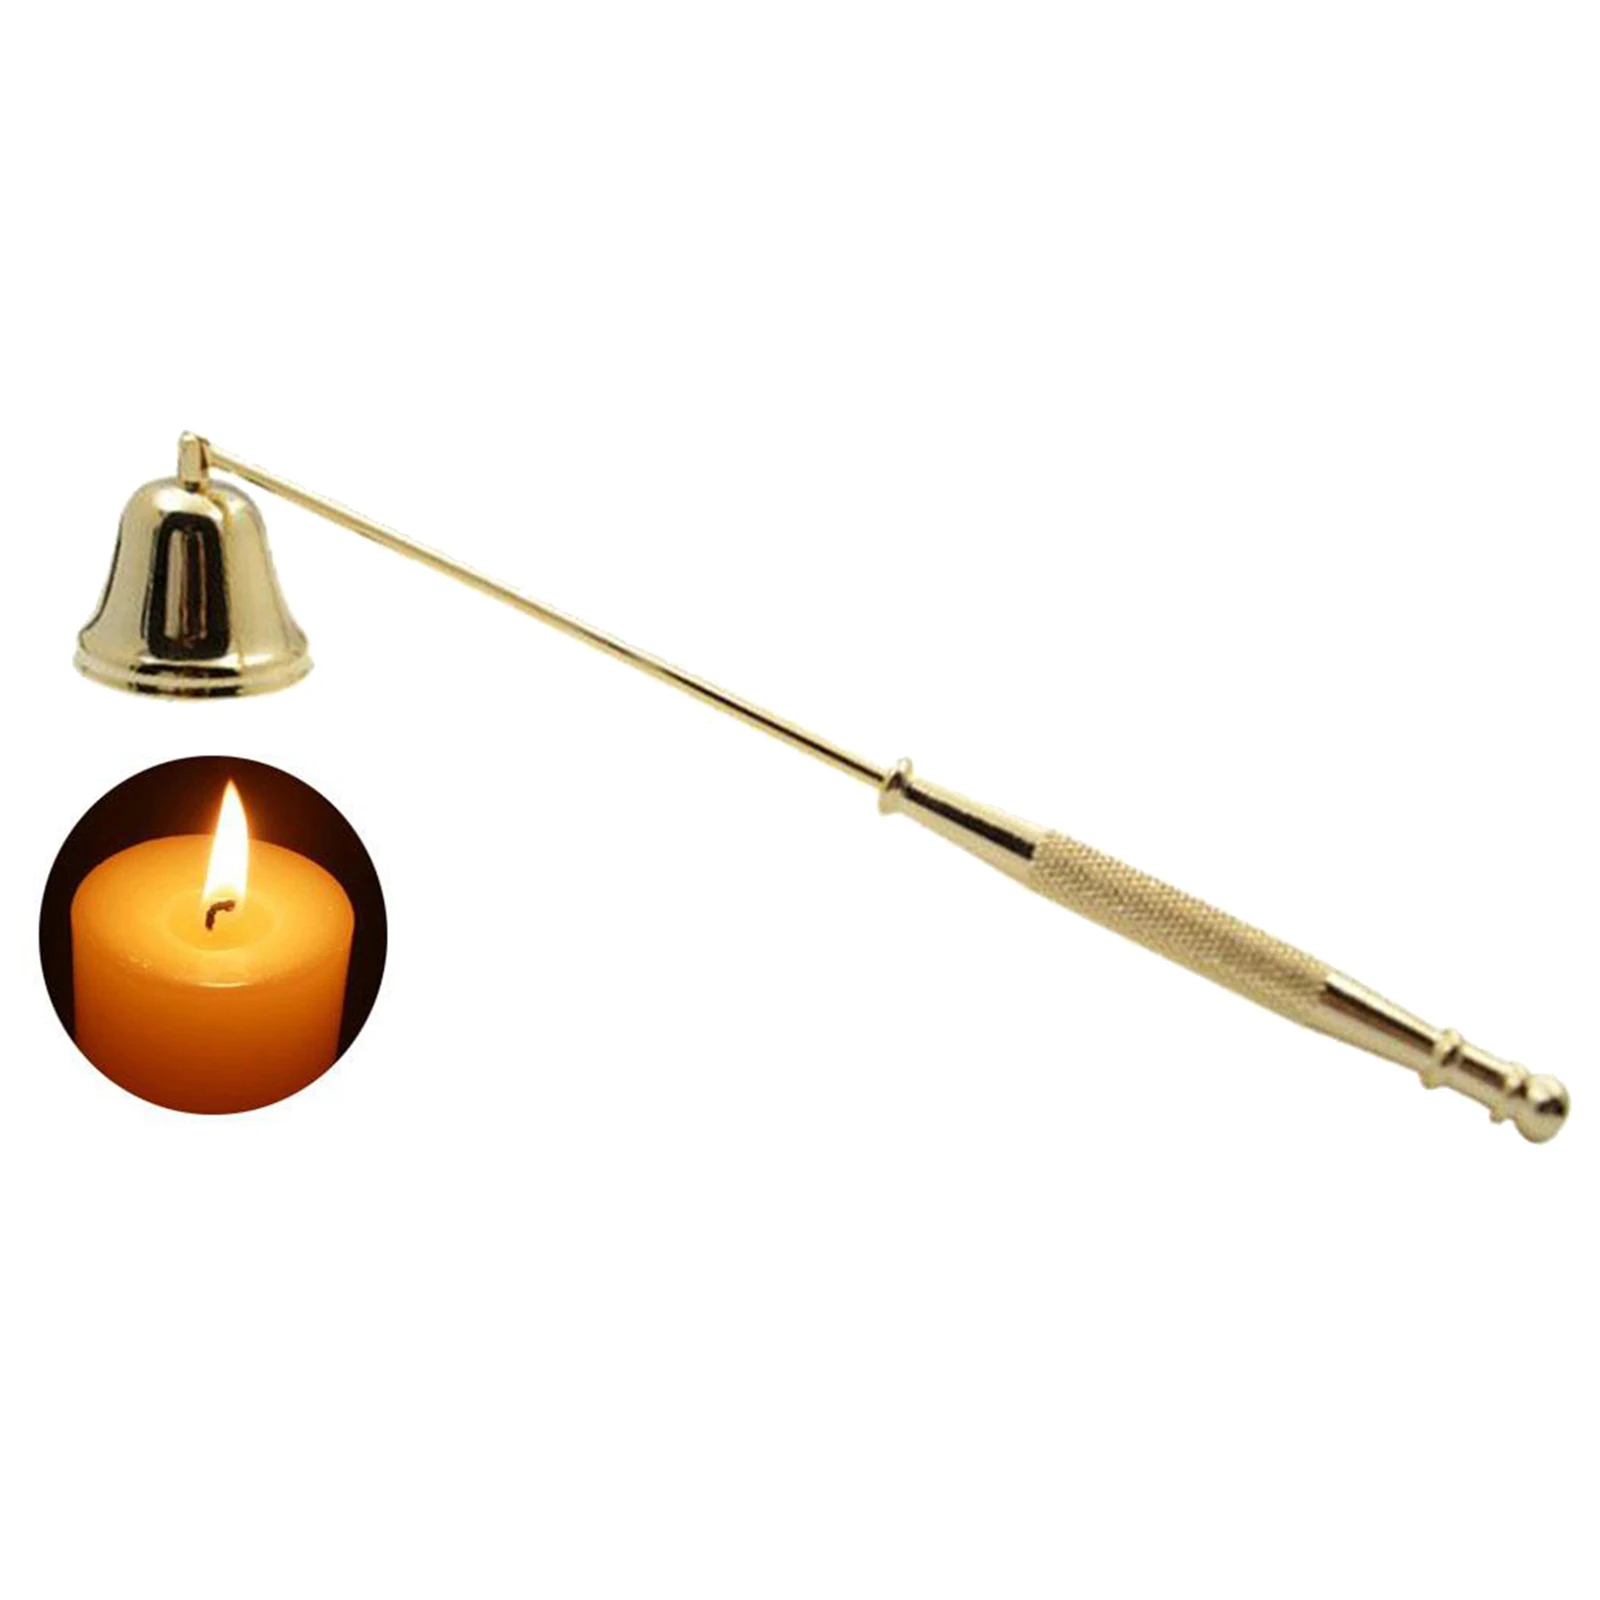 Candle Snuffer Polished Stainless Steel Long Handle Candle Stopper Safely Extinguisher Snuffer for Putting Out Flame Gold 